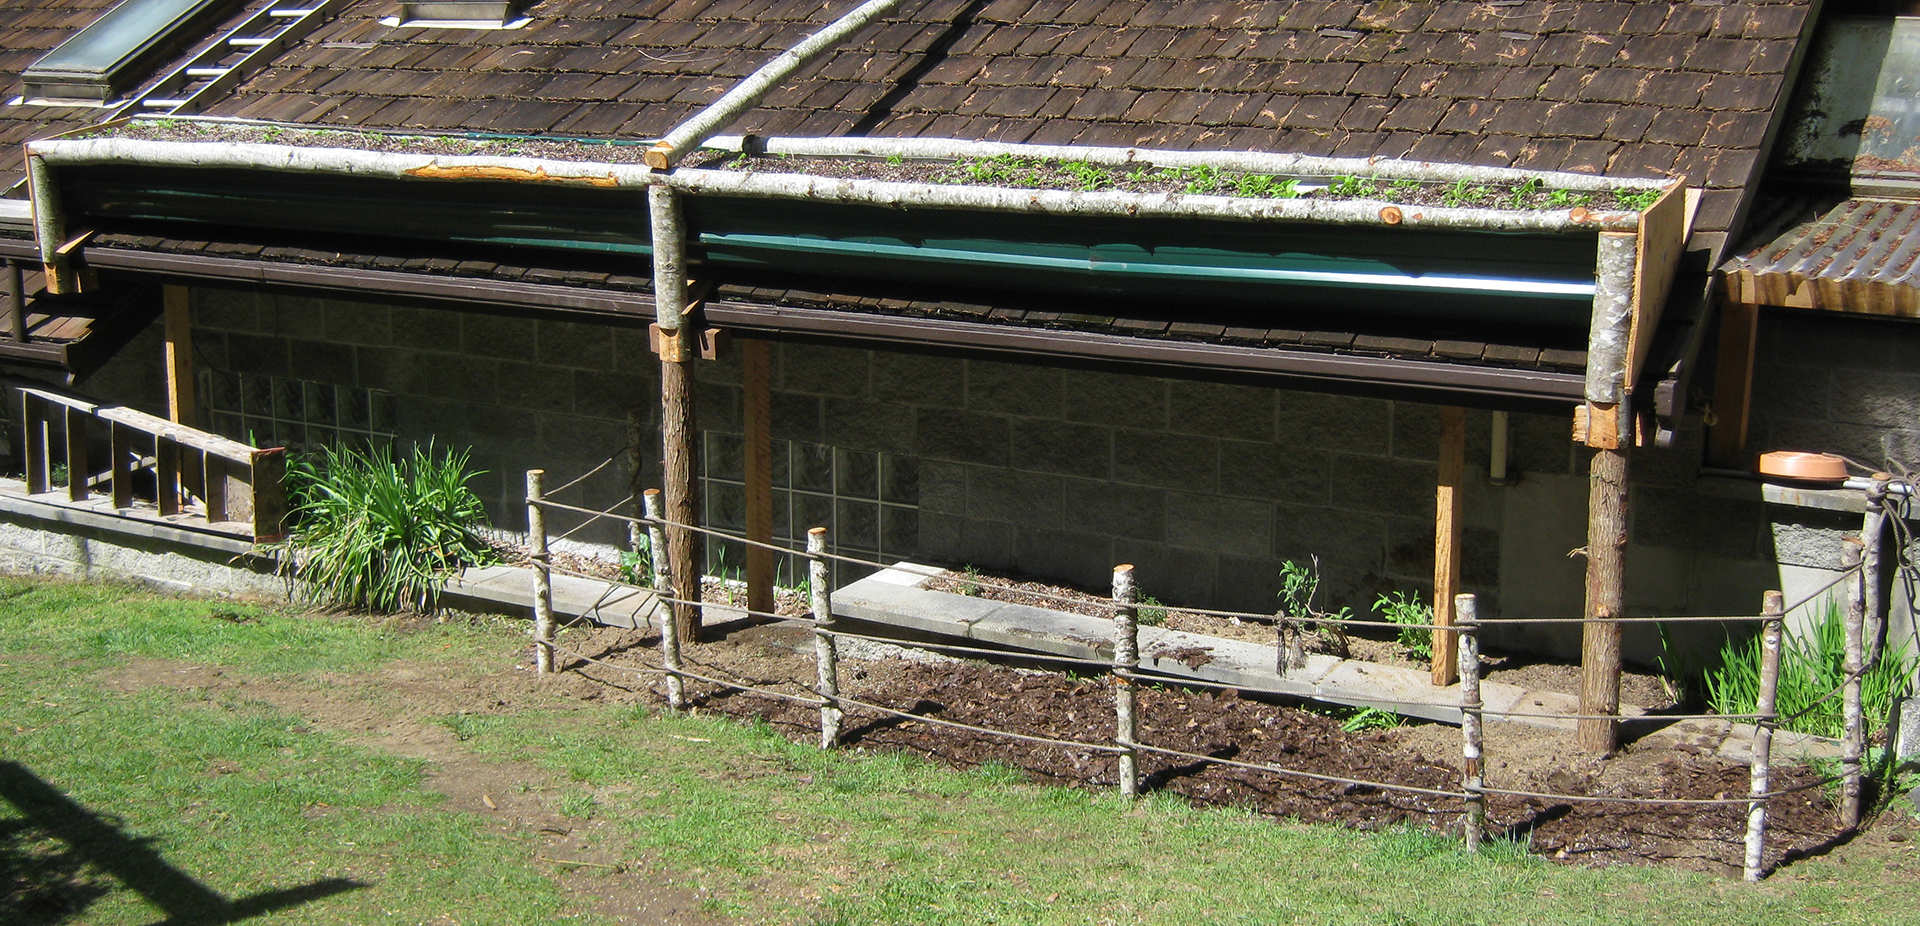 tomato planter on the roof, potato patch below